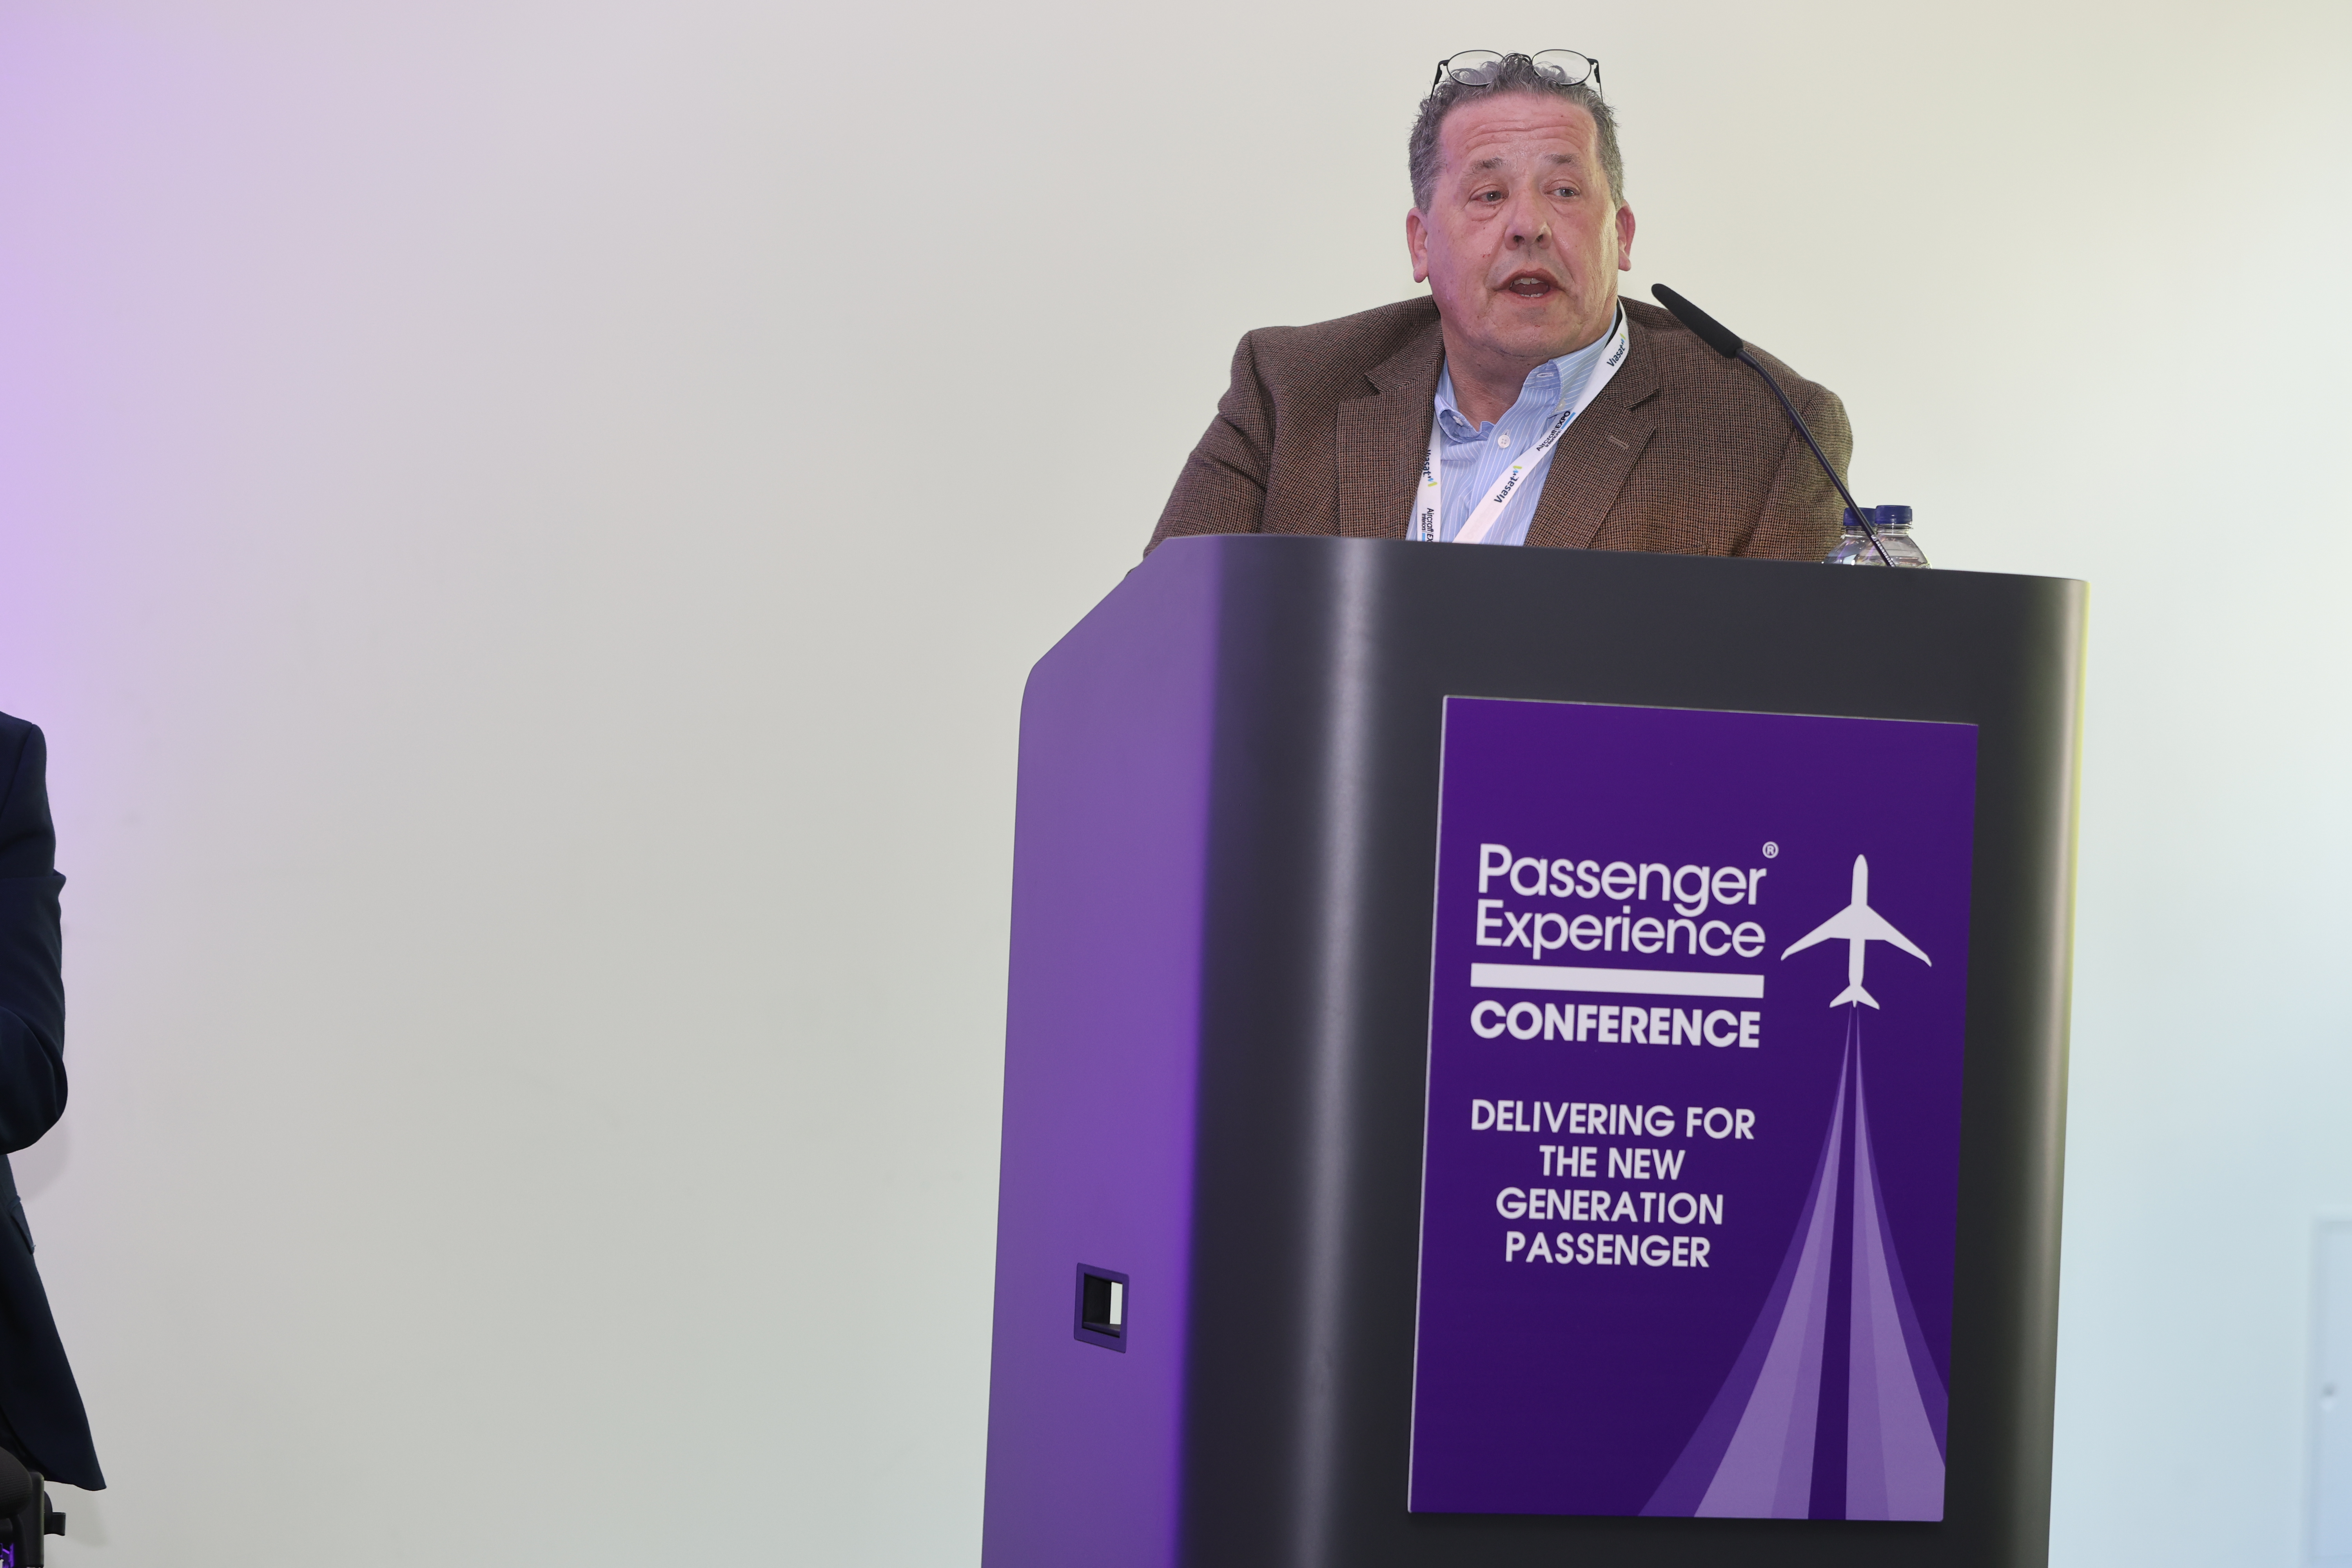 chris wood speaking at passenger experience conference 2023 from a podium